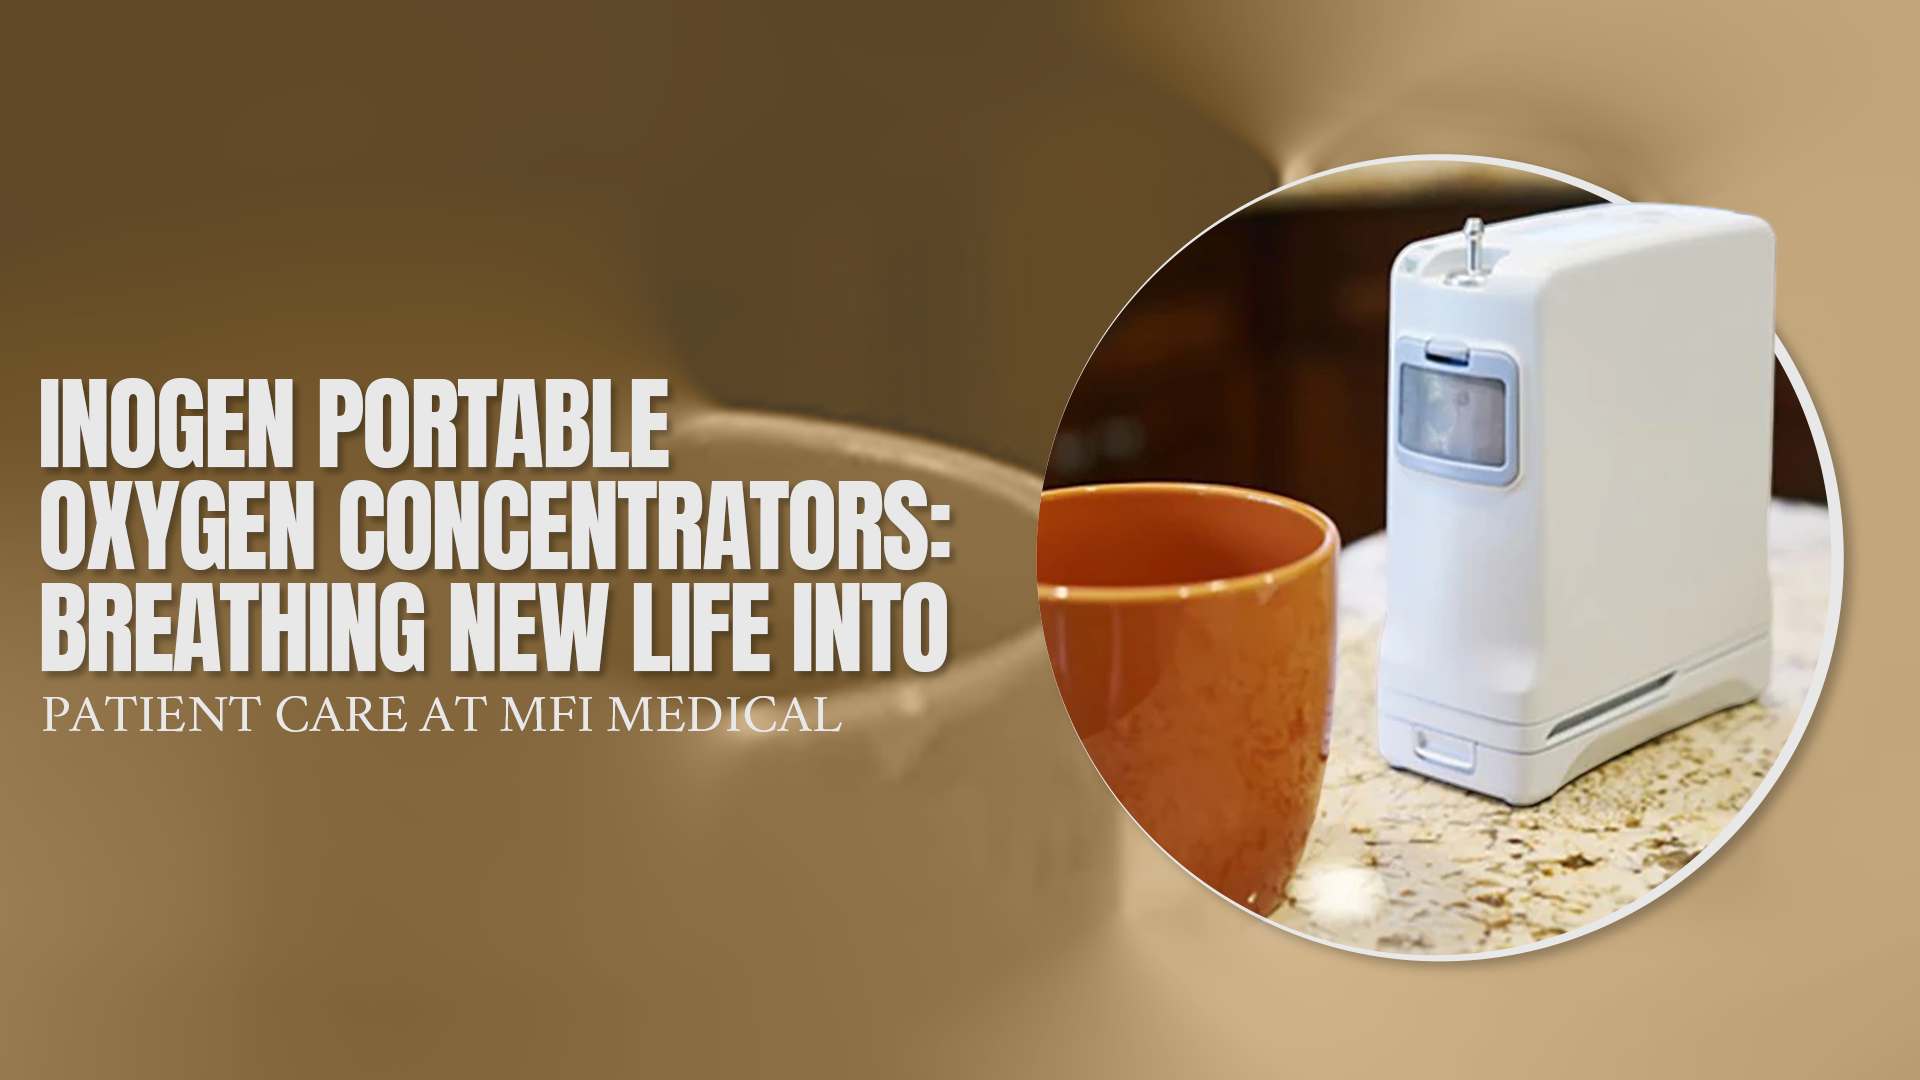 Inogen Portable Oxygen Concentrators: Breathing New Life into Patient Care at MFI Medical